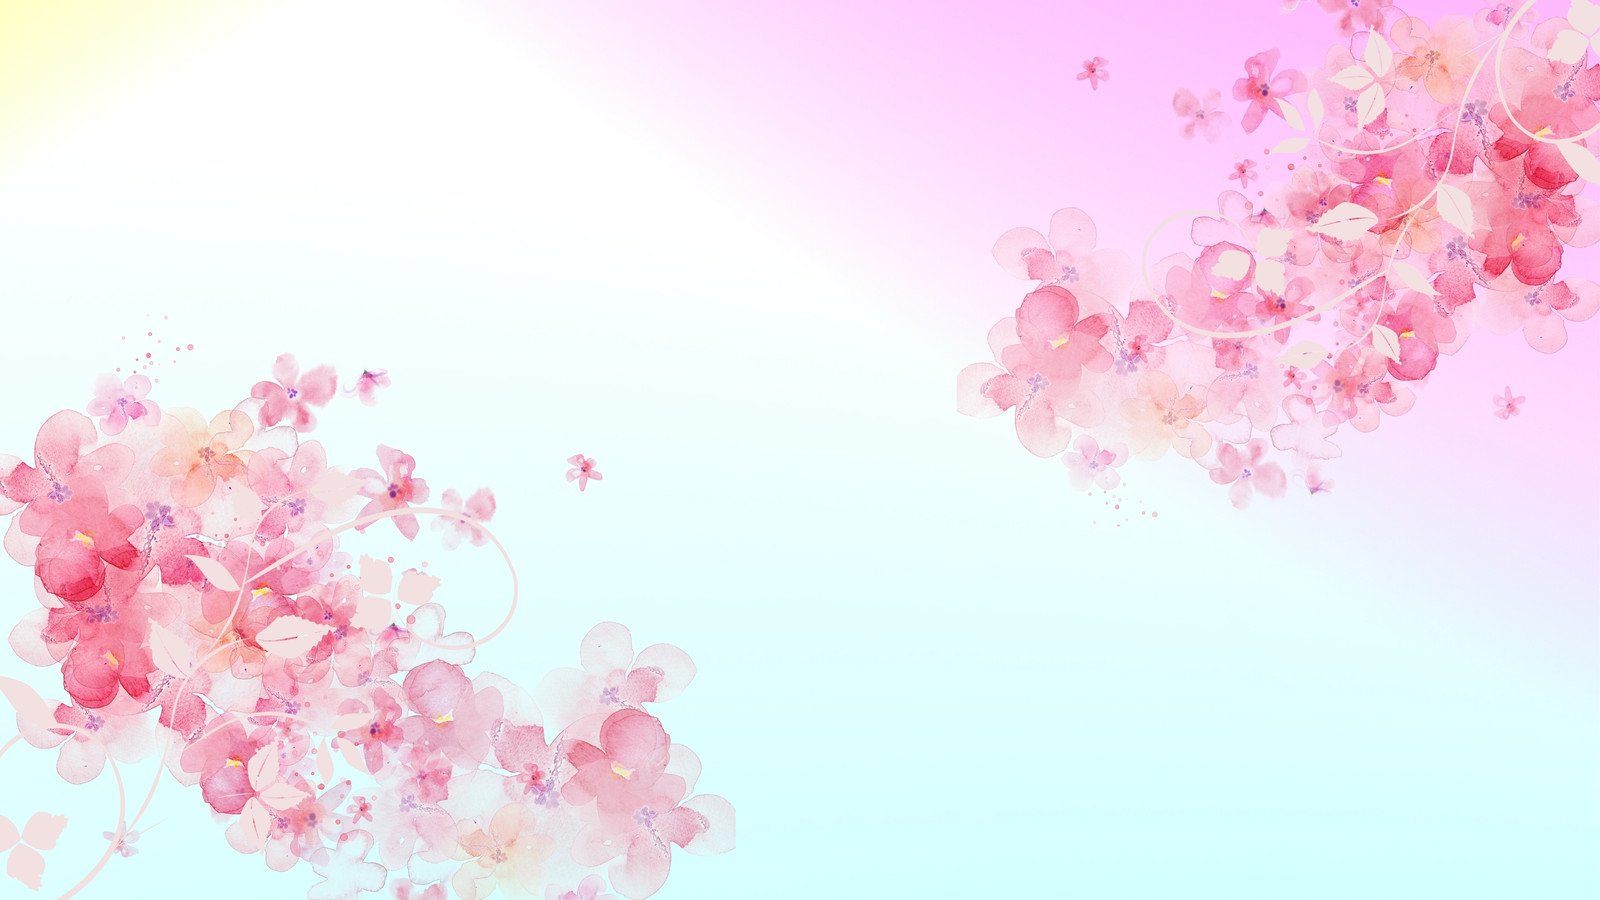 Customize 2,827+ Pink Aesthetic Wallpaper Templates Online - Canva